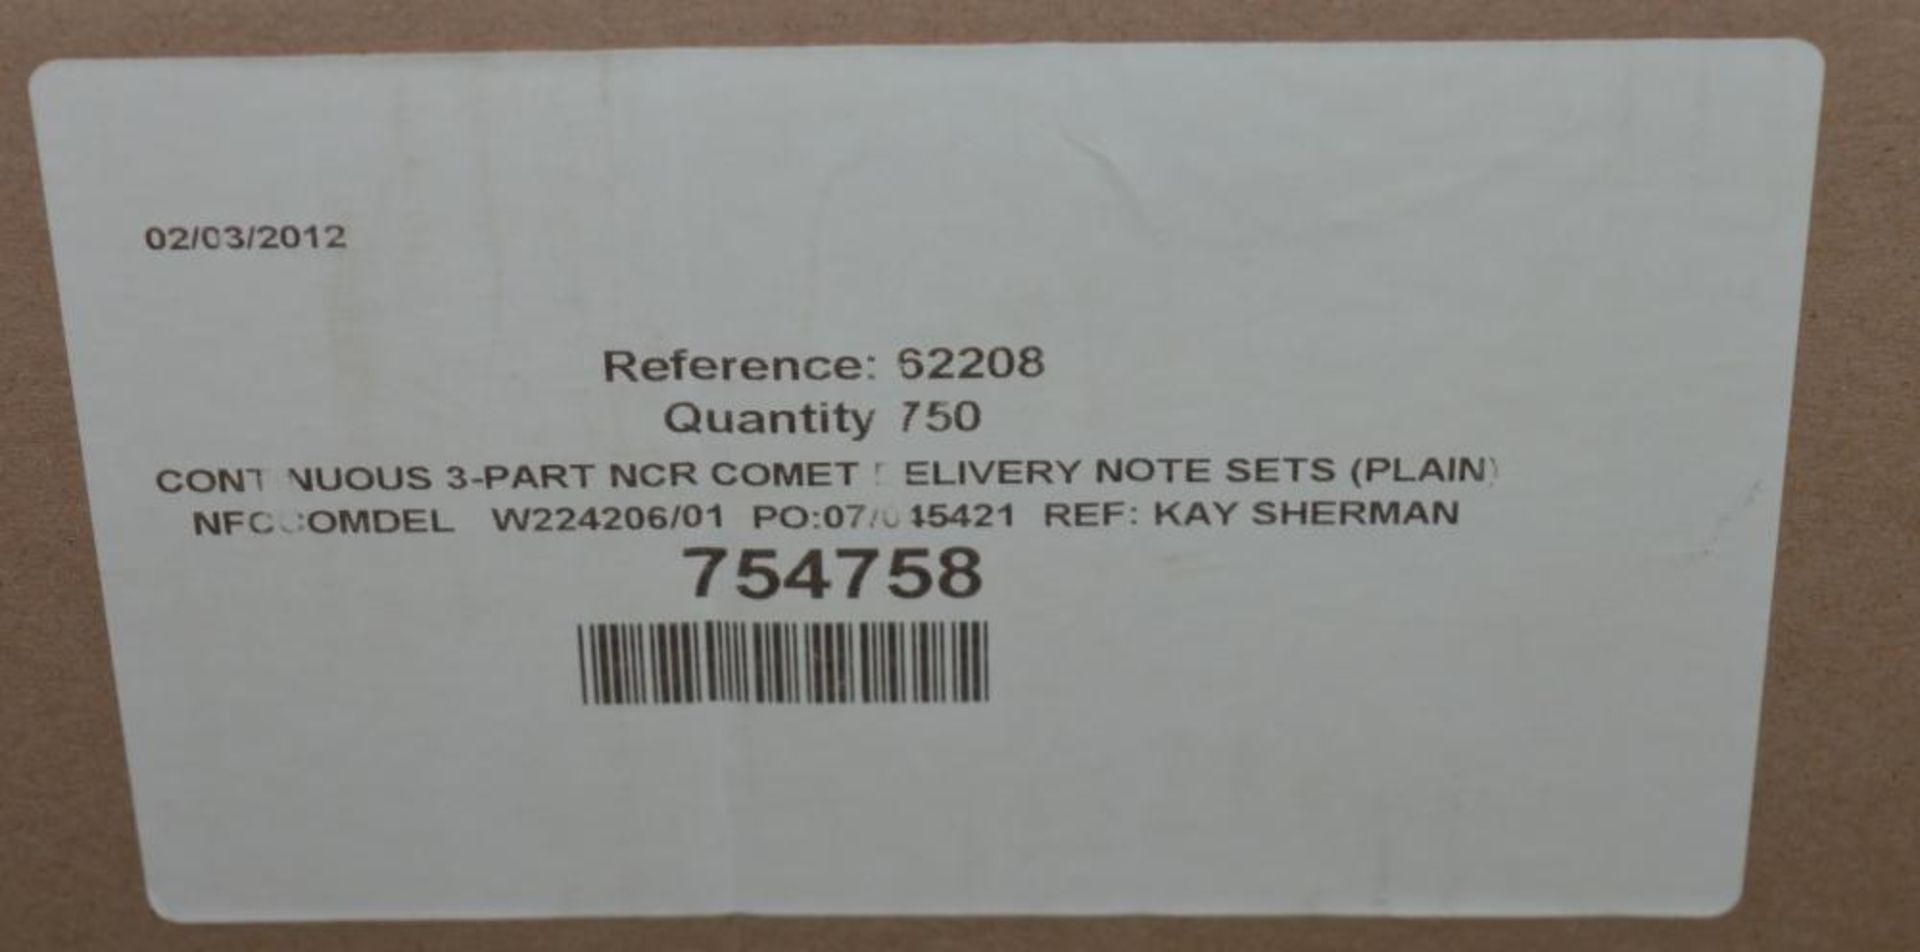 3 x Boxes of Continuous 3 Part Delivery Note Paper Sets - Plain - Quantity 750 Per Box - New Boxed - Image 2 of 4